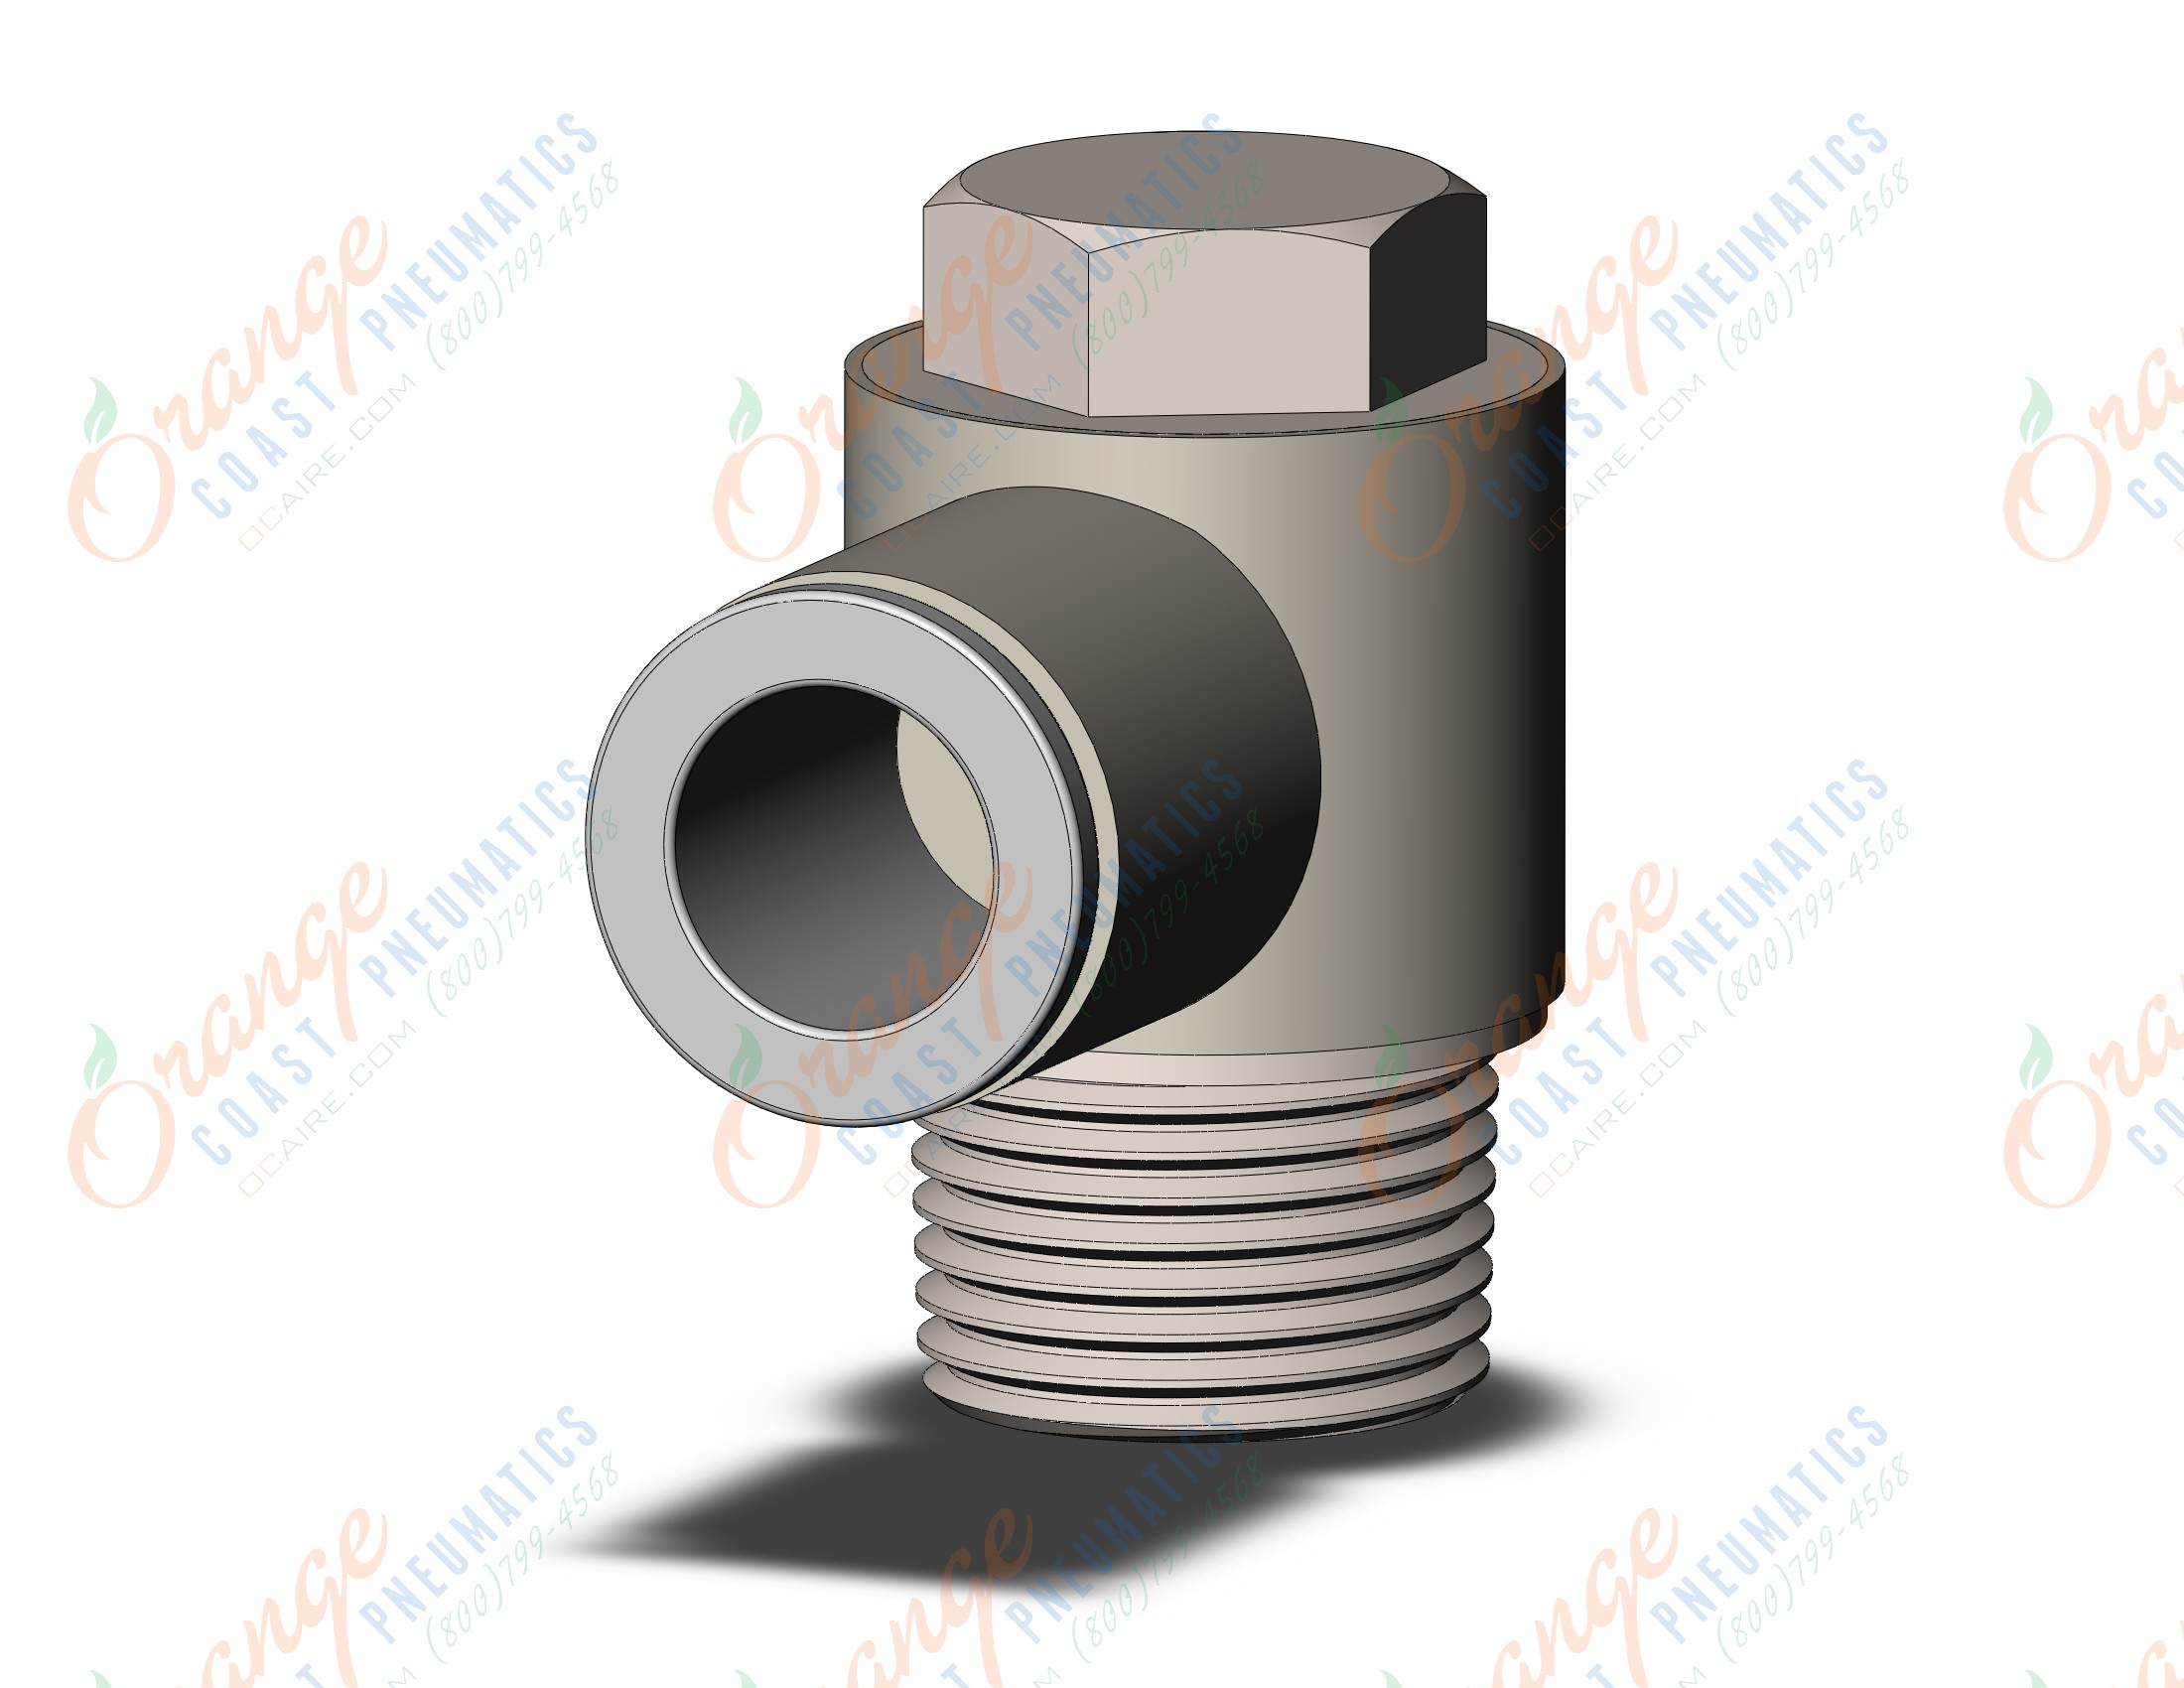 SMC KQ2V10-03NS fitting, uni male elbow, KQ2 FITTING (sold in packages of 10; price is per piece)